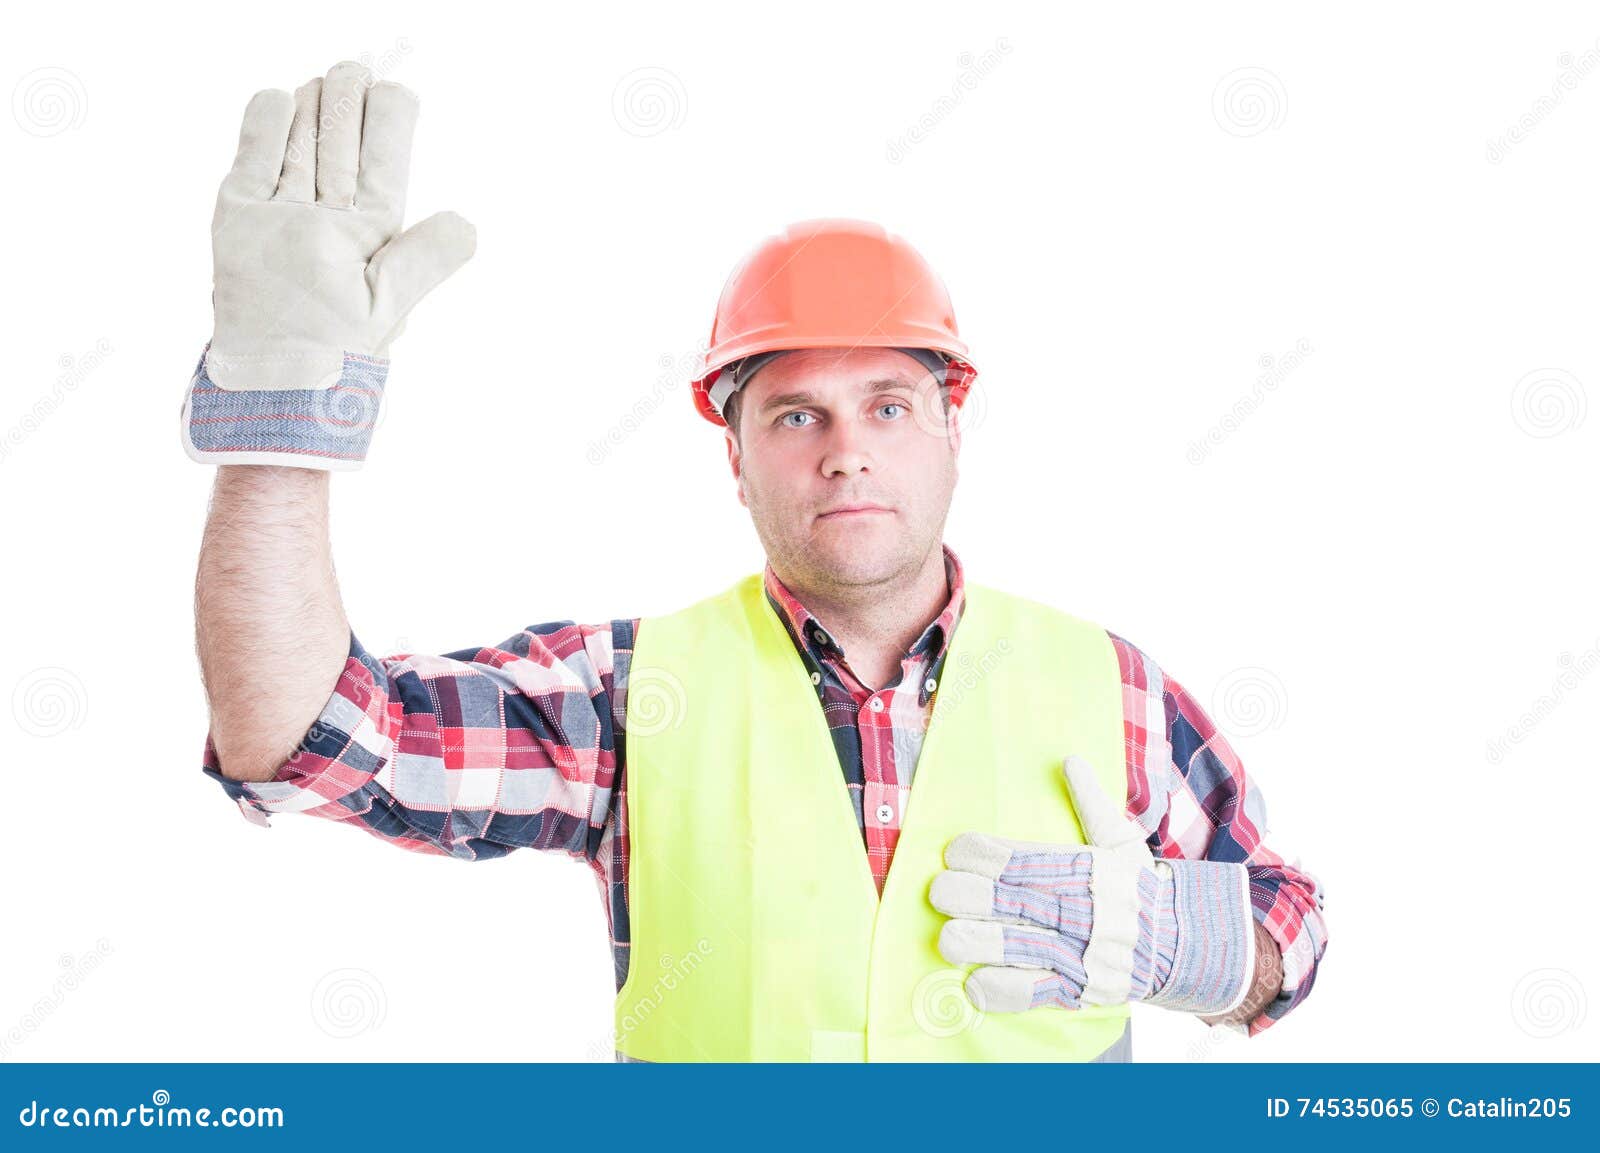 Male Builder Swearing Or Making Oath Stock Image - Image of contractor ...